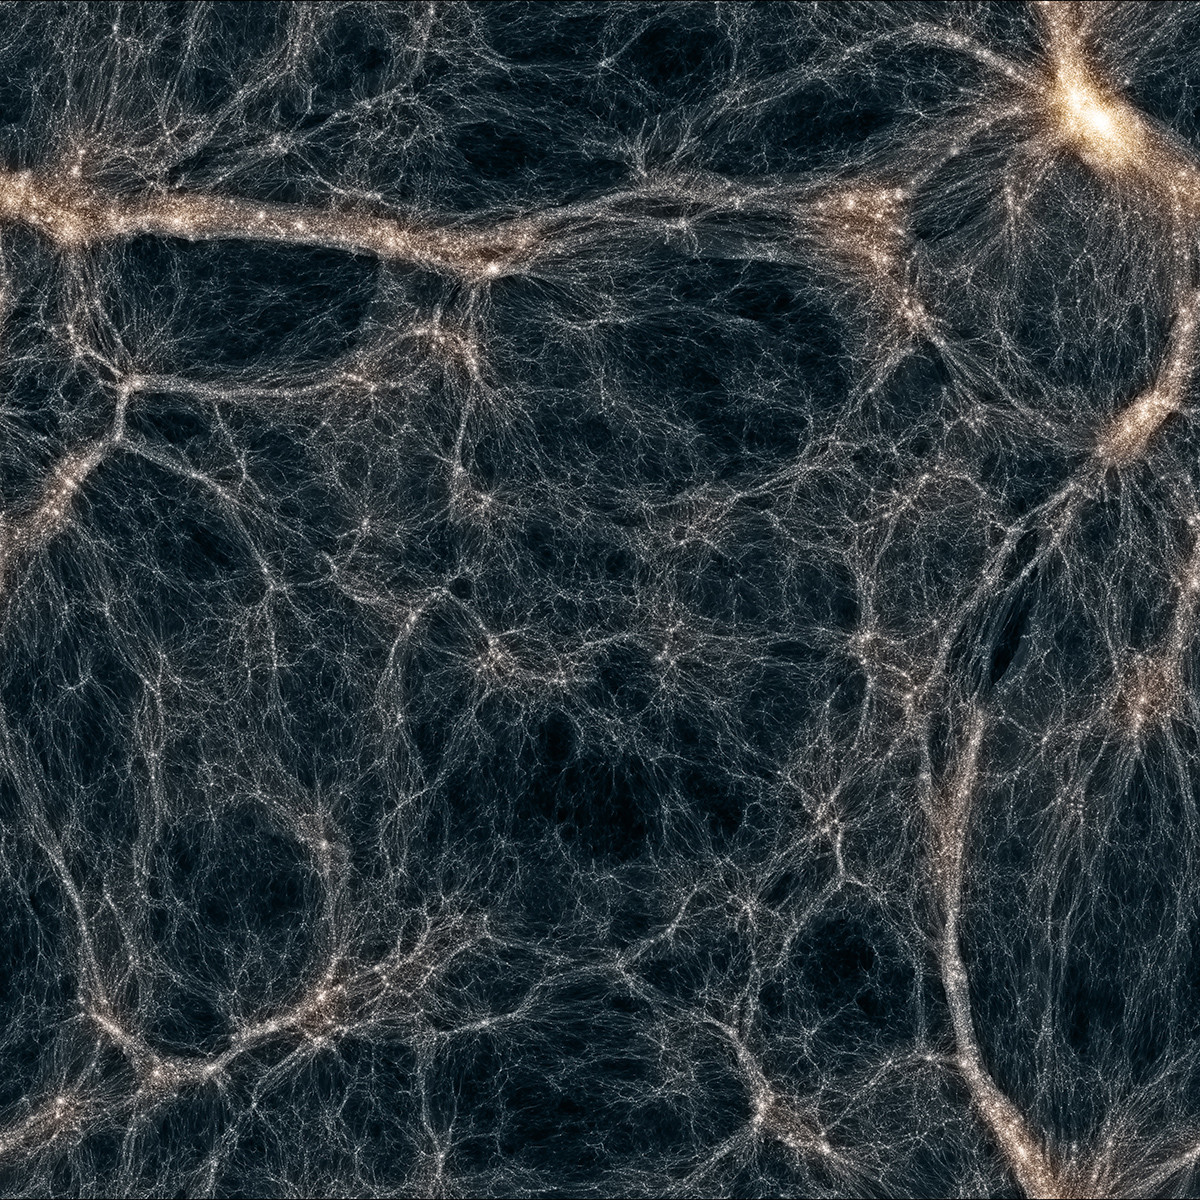 Structure of the visible Universe if we could see dark matter. The universe looks just like neurons in a human mind. What if… our universe itself is just the brain and neuronal network of some much, much larger and more significant being then we could ever even imagine?